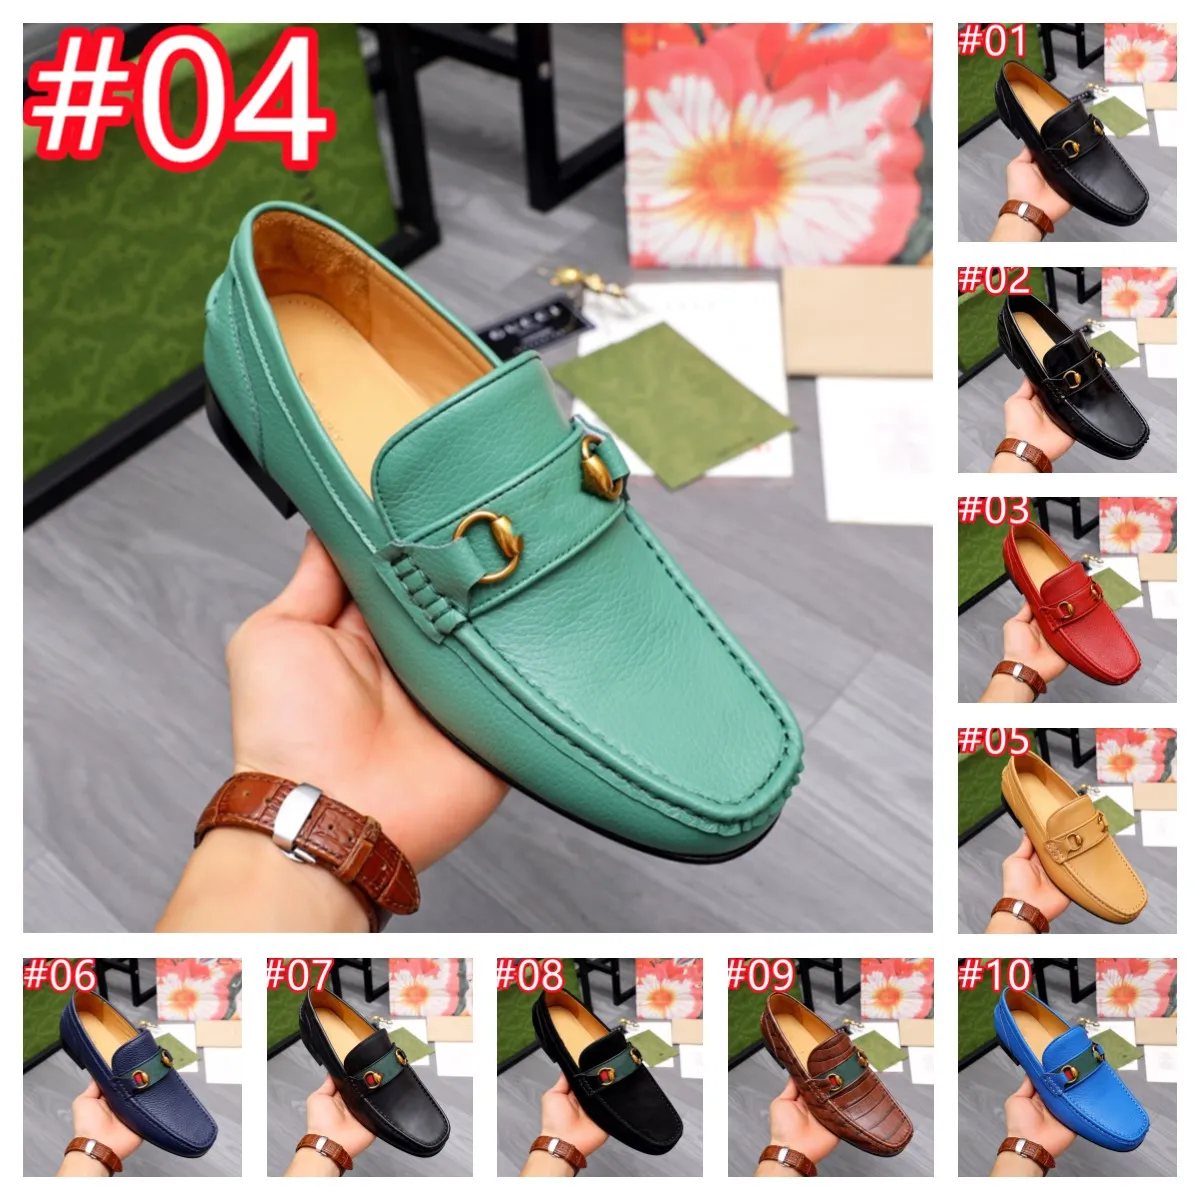 11MODEL LEATHER SHOES Low Heel CASUAL SHOE DRESS SHOES Brogue SHOES Spring Ankle Boots Vintage Classic Male CASUAL Plus Size 38-45